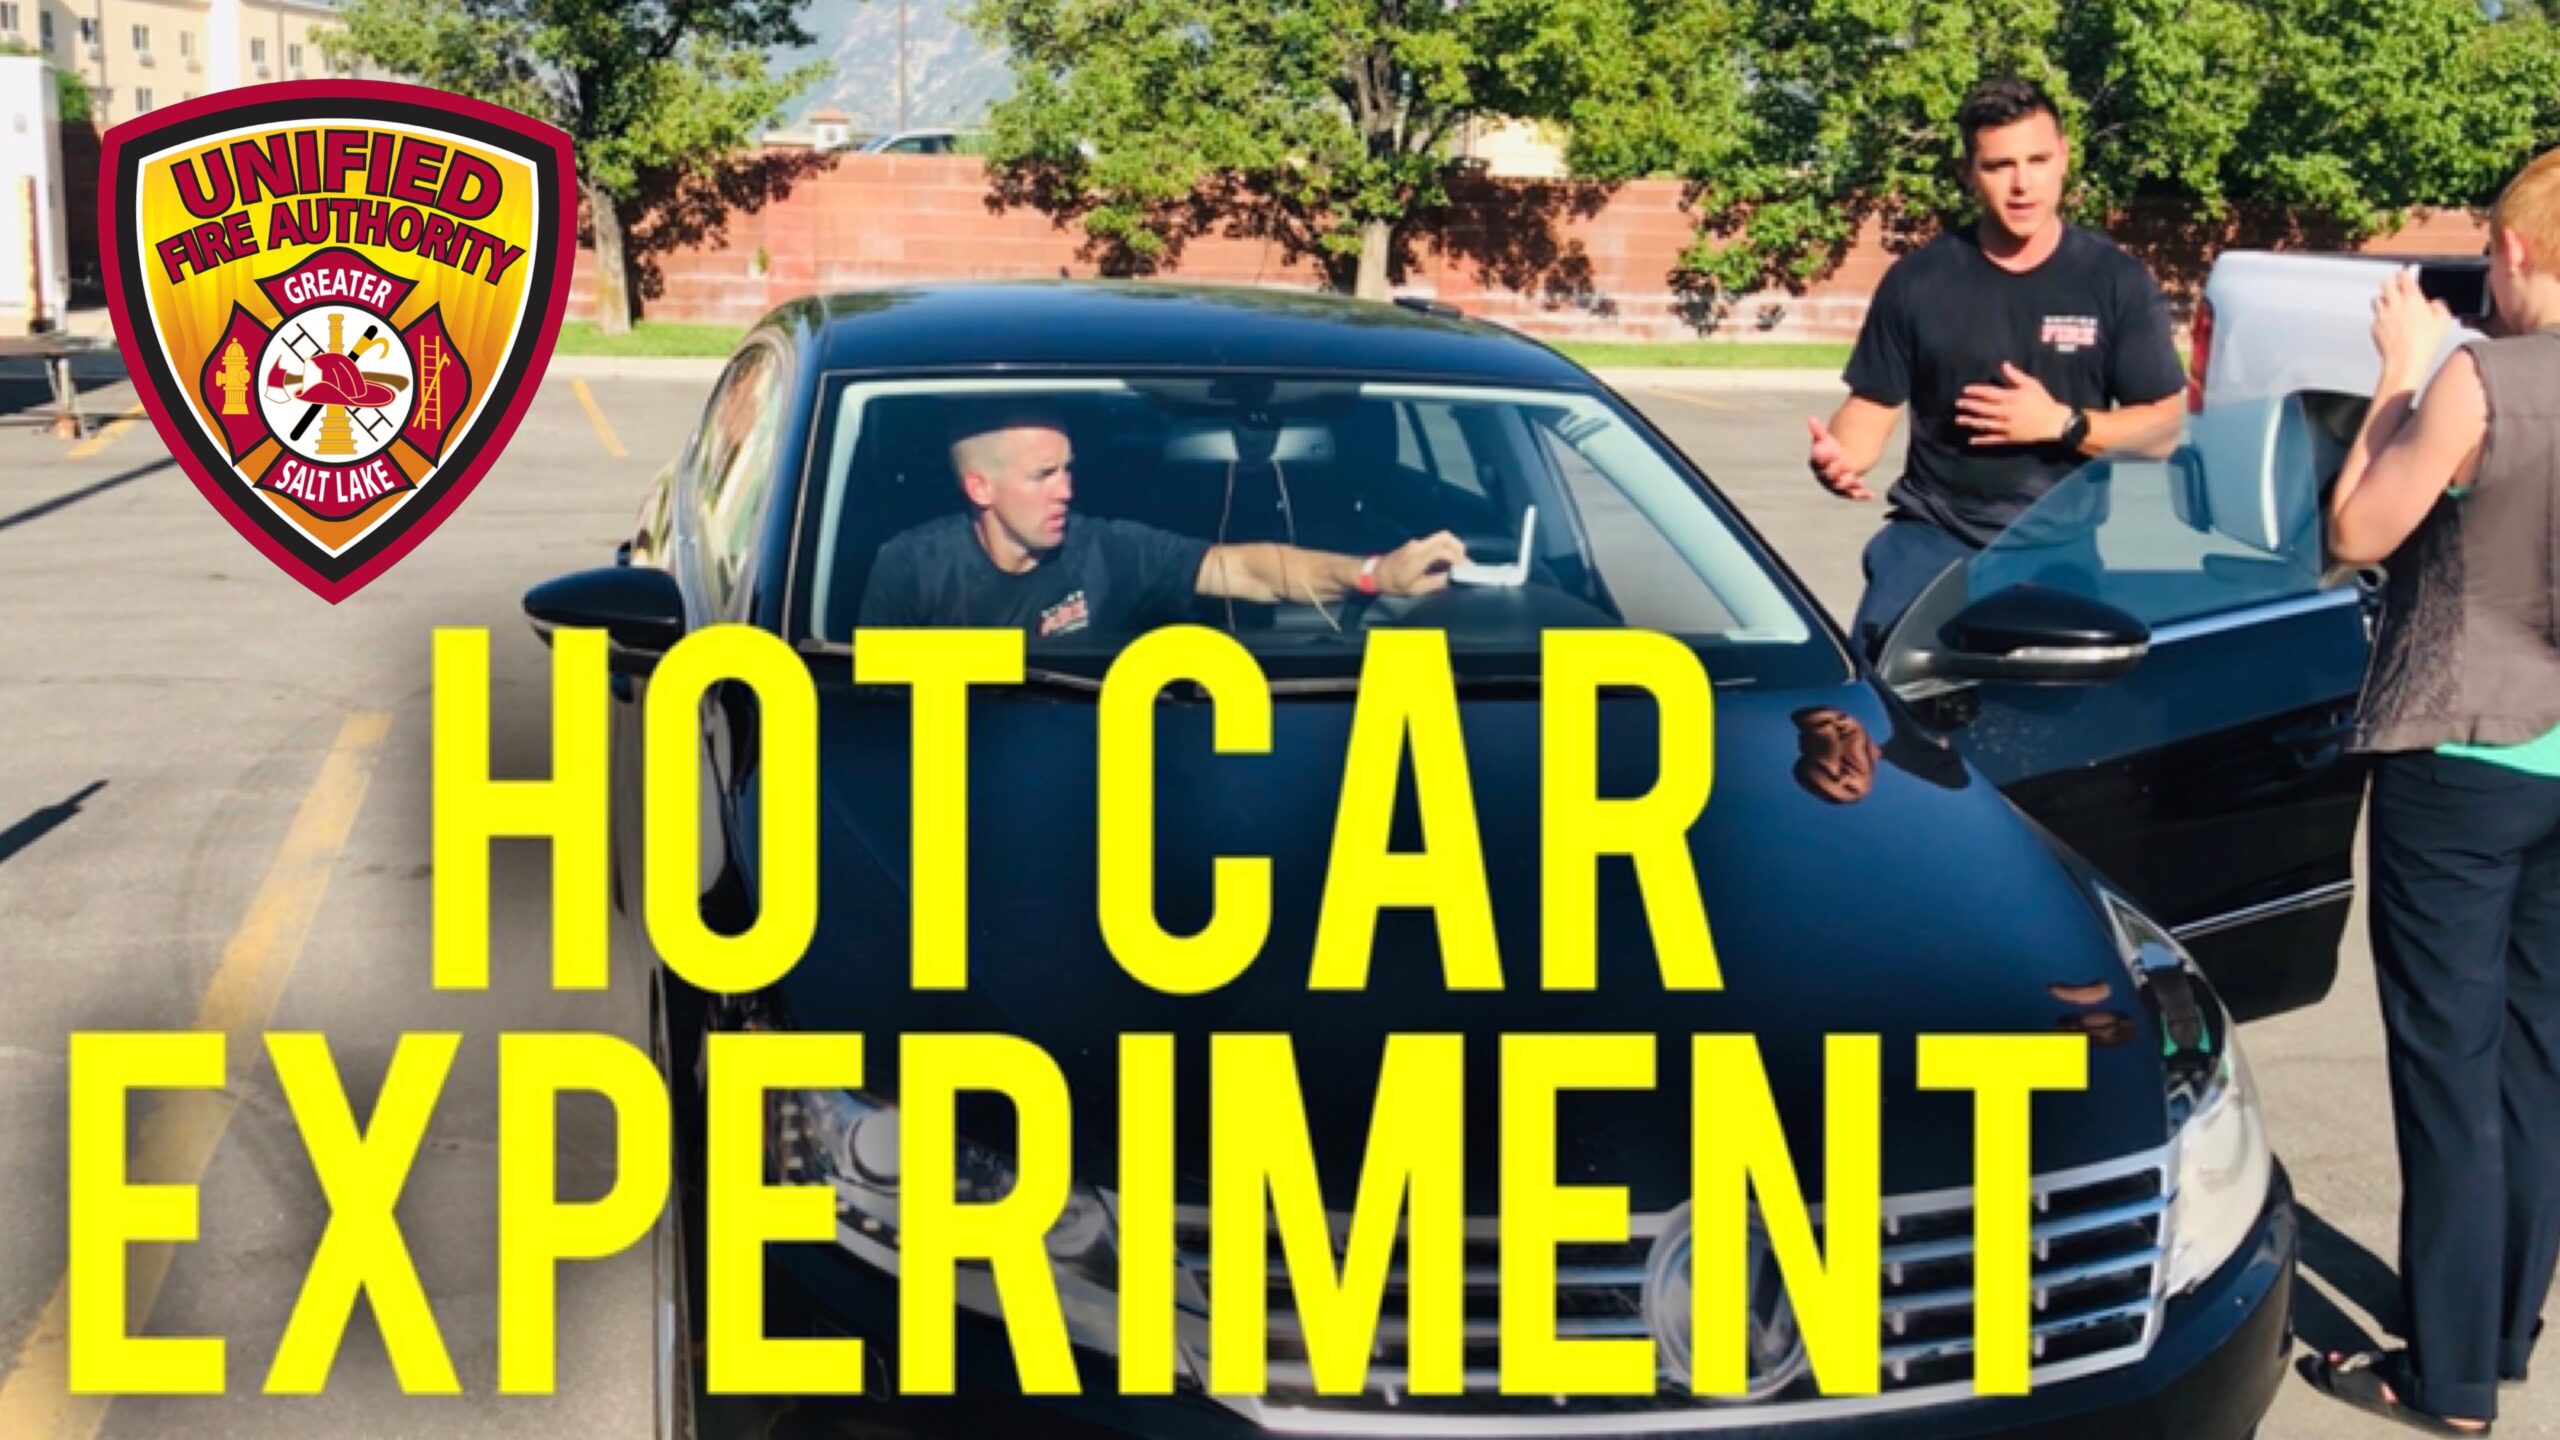 firefighter standing by car, firefighter sitting in car, "Hot Car Experiment"